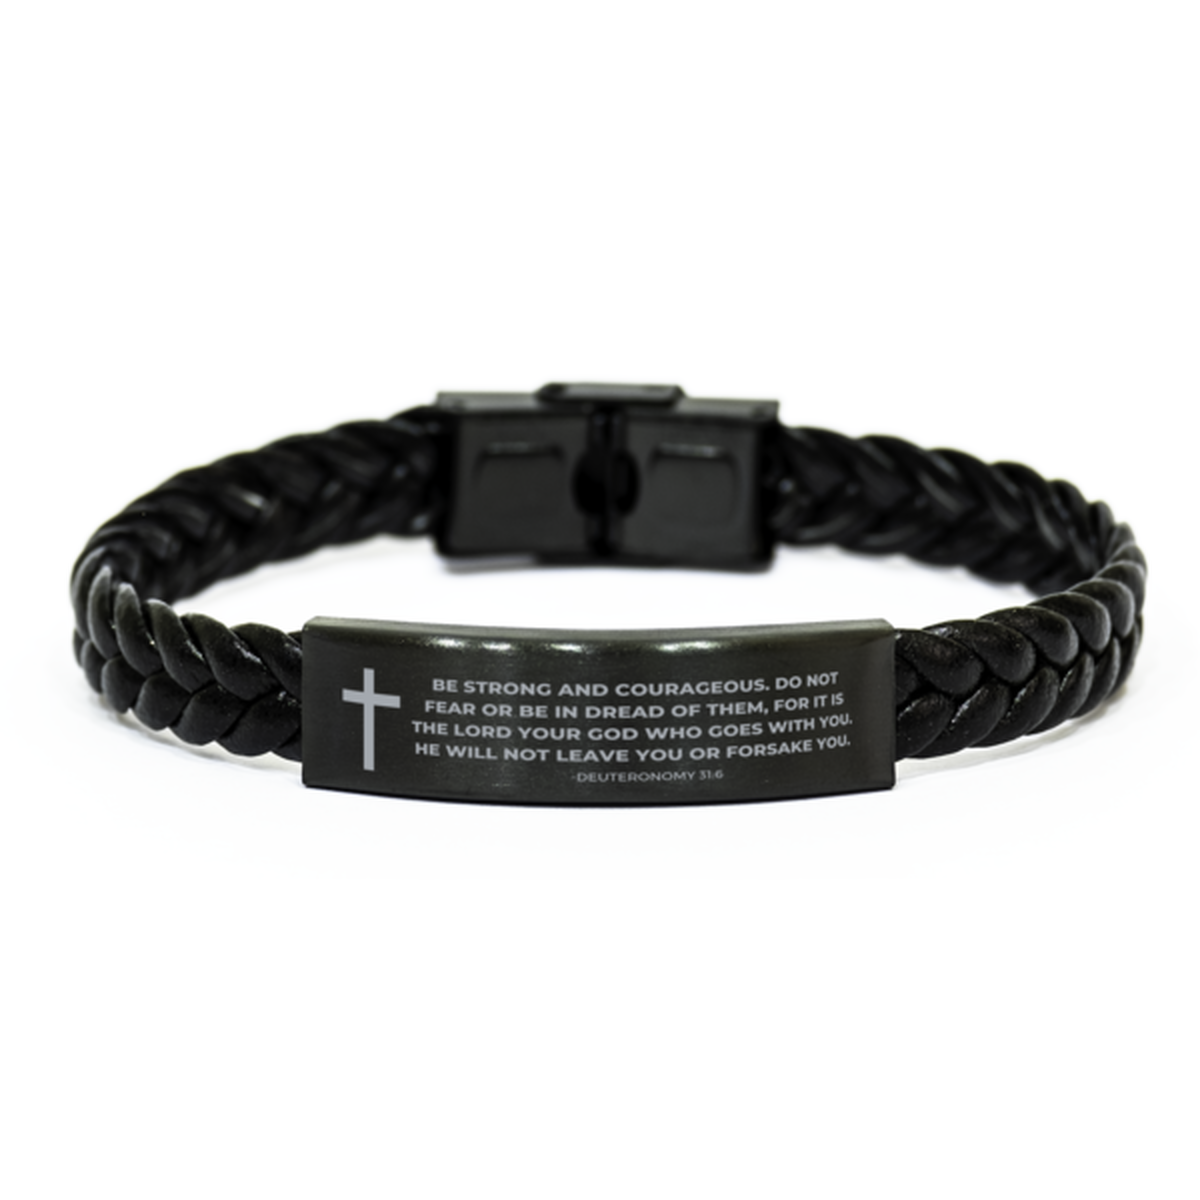 Baptism Gifts For Teenage Boys Girls, Christian Bible Verse Braided Leather Bracelet, Be strong and courageous, Catholic Confirmation Gifts for Son, Godson, Grandson, Nephew